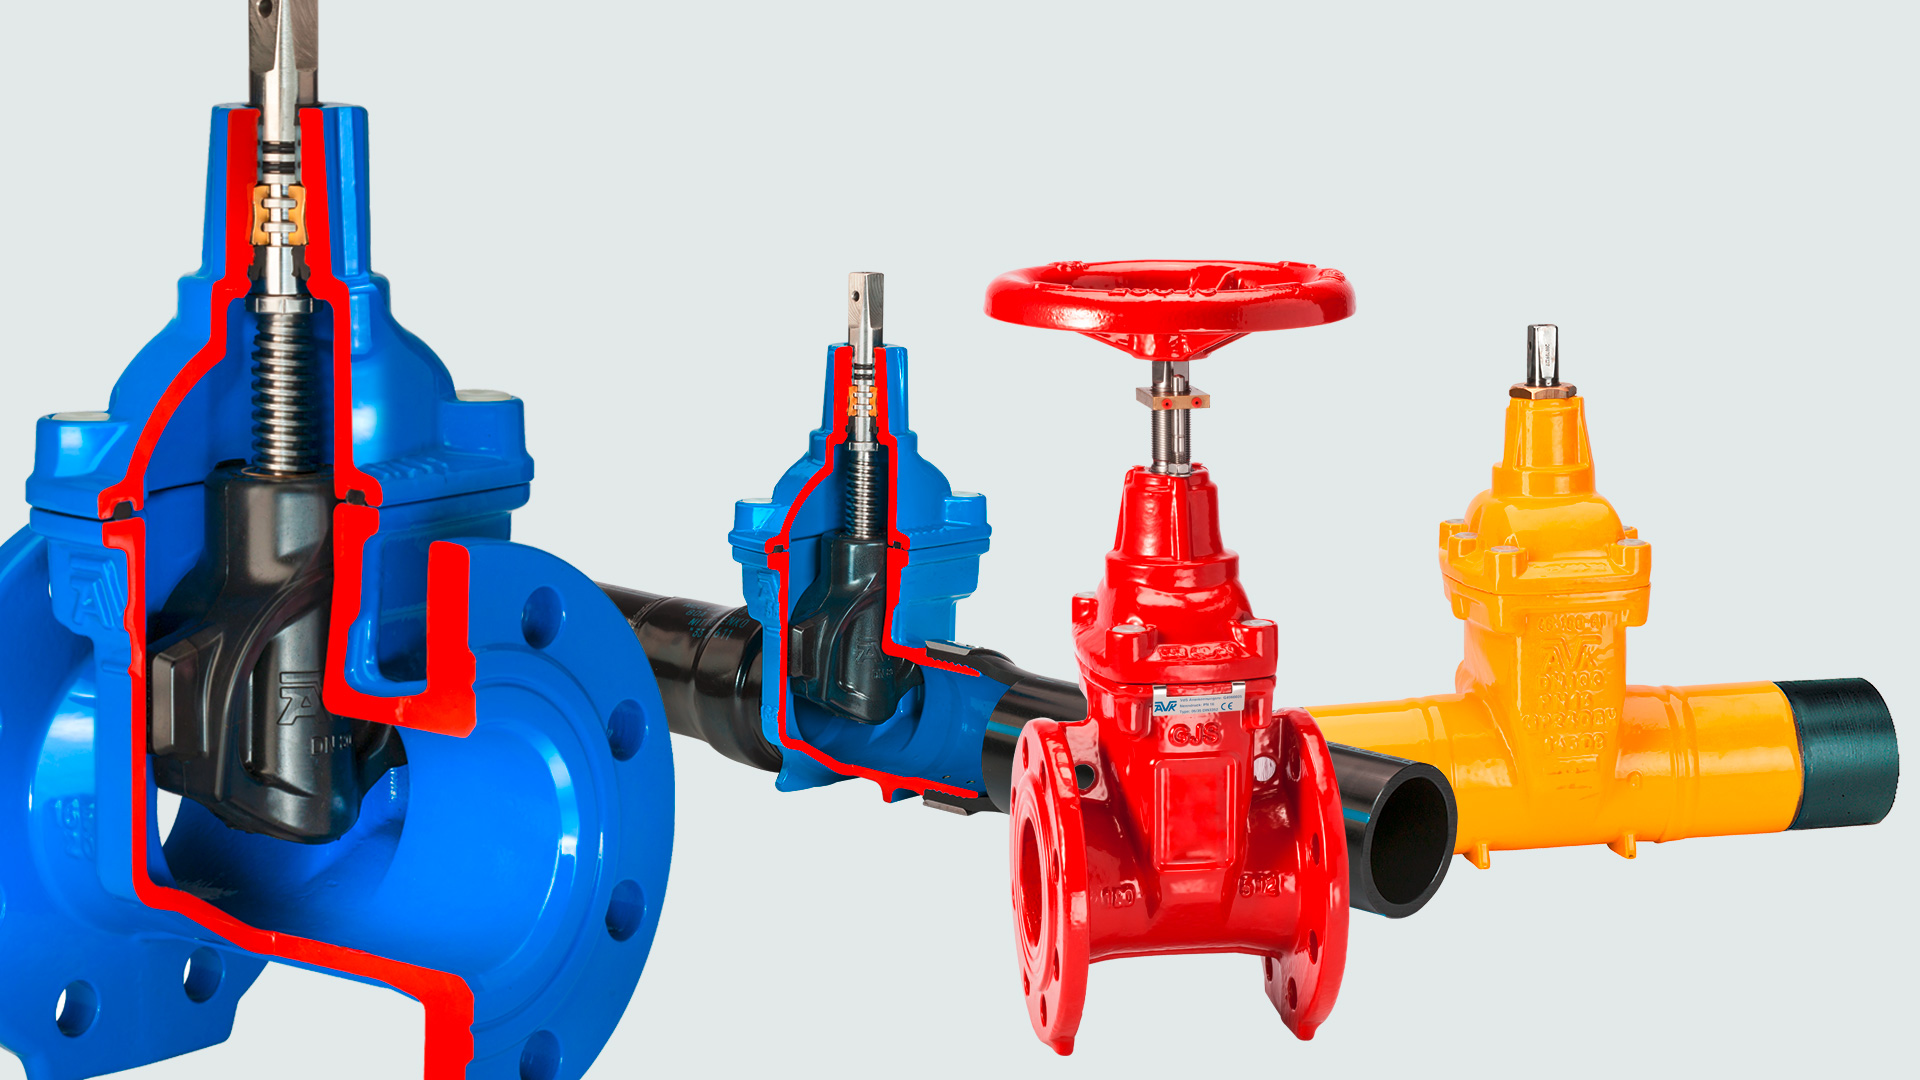 AVK gate valves with cutaway and visible wedge